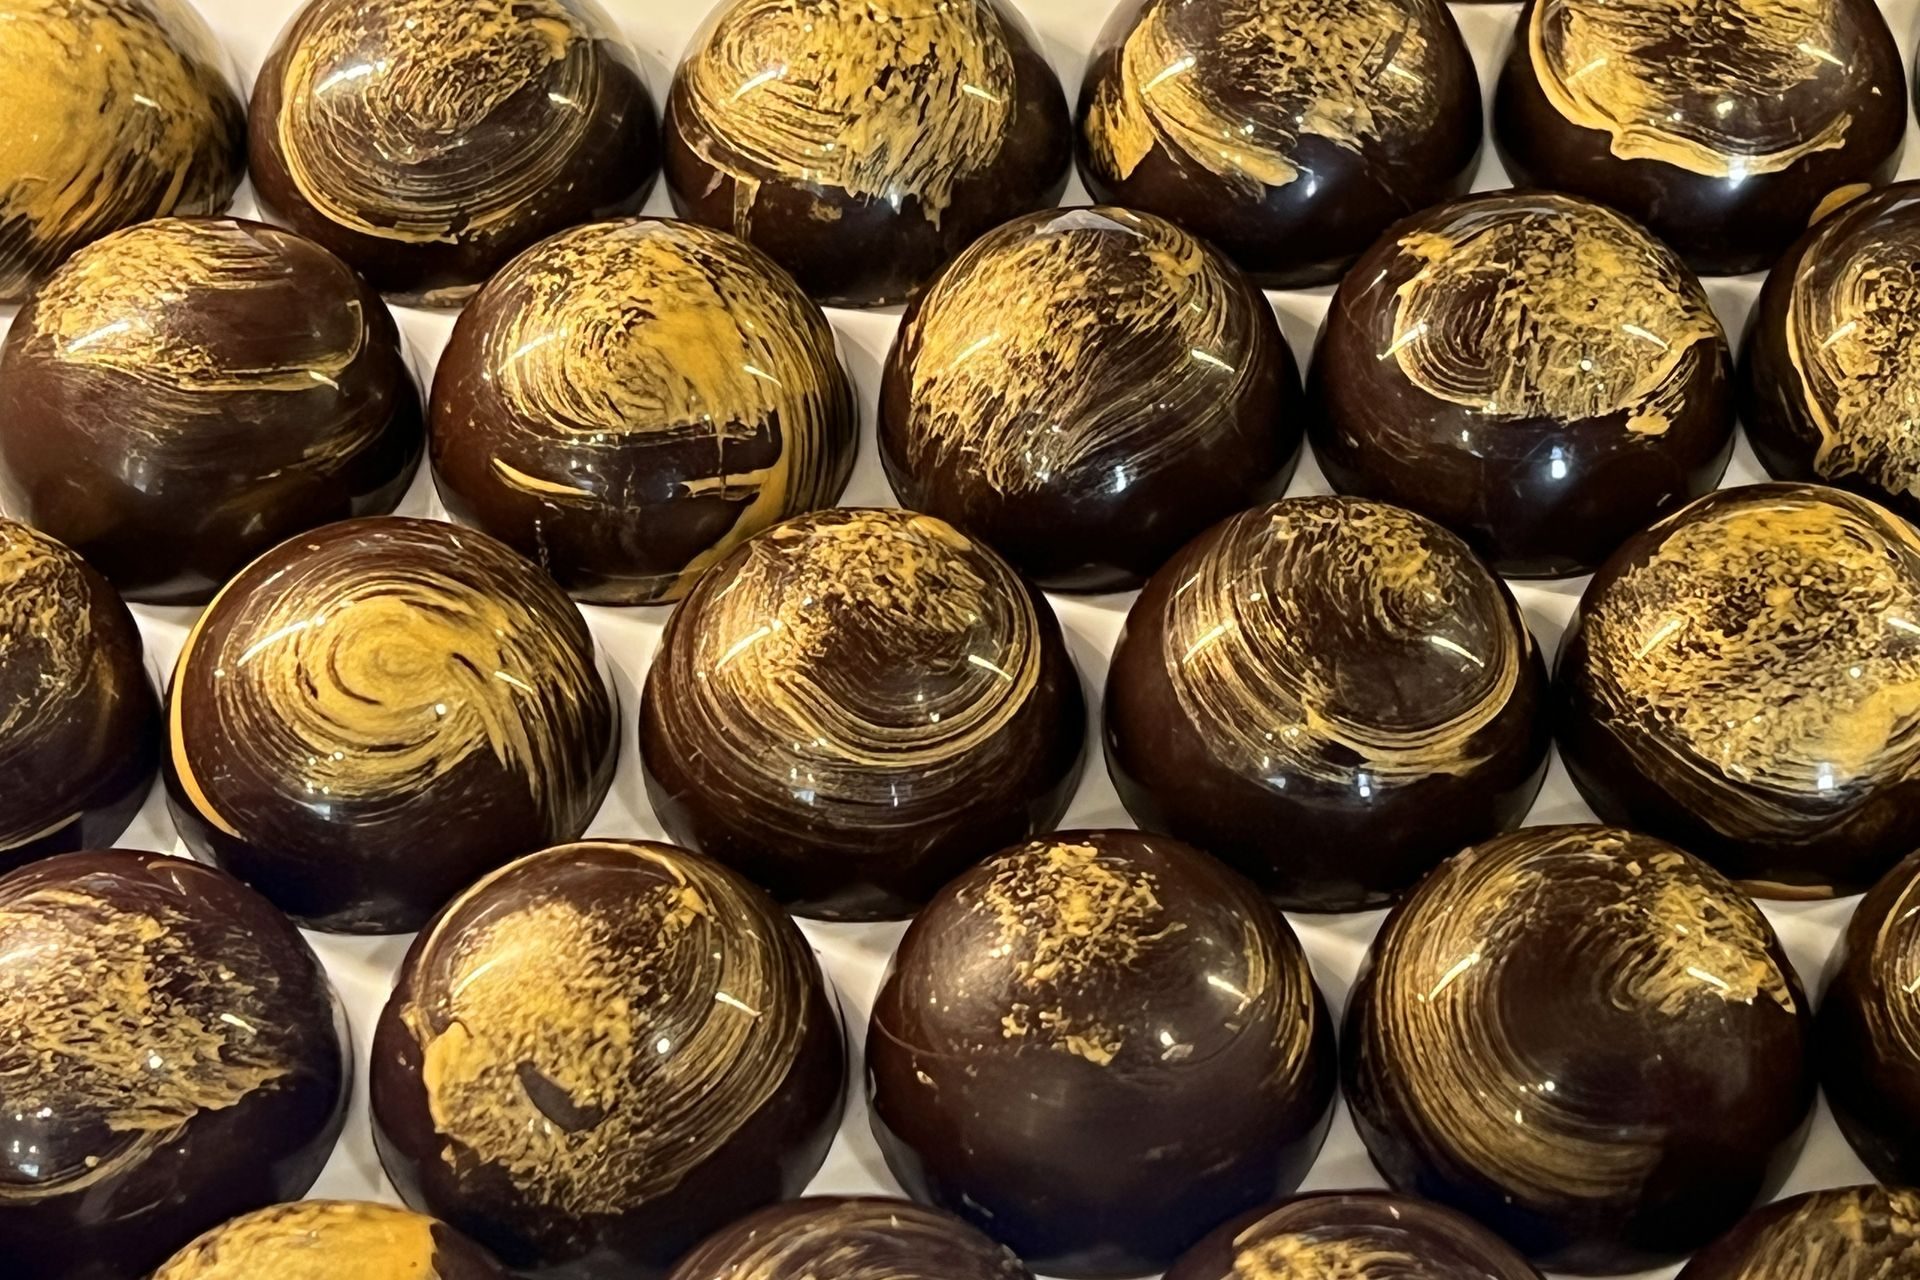 <p>Belgium is indeed the country for chocolate lovers. It produces no less than 650,000 tonnes, the majority of which is intended for export. In 2015, the country had around 500 chocolatiers and 2,000 chocolate shops spread across the country.</p>